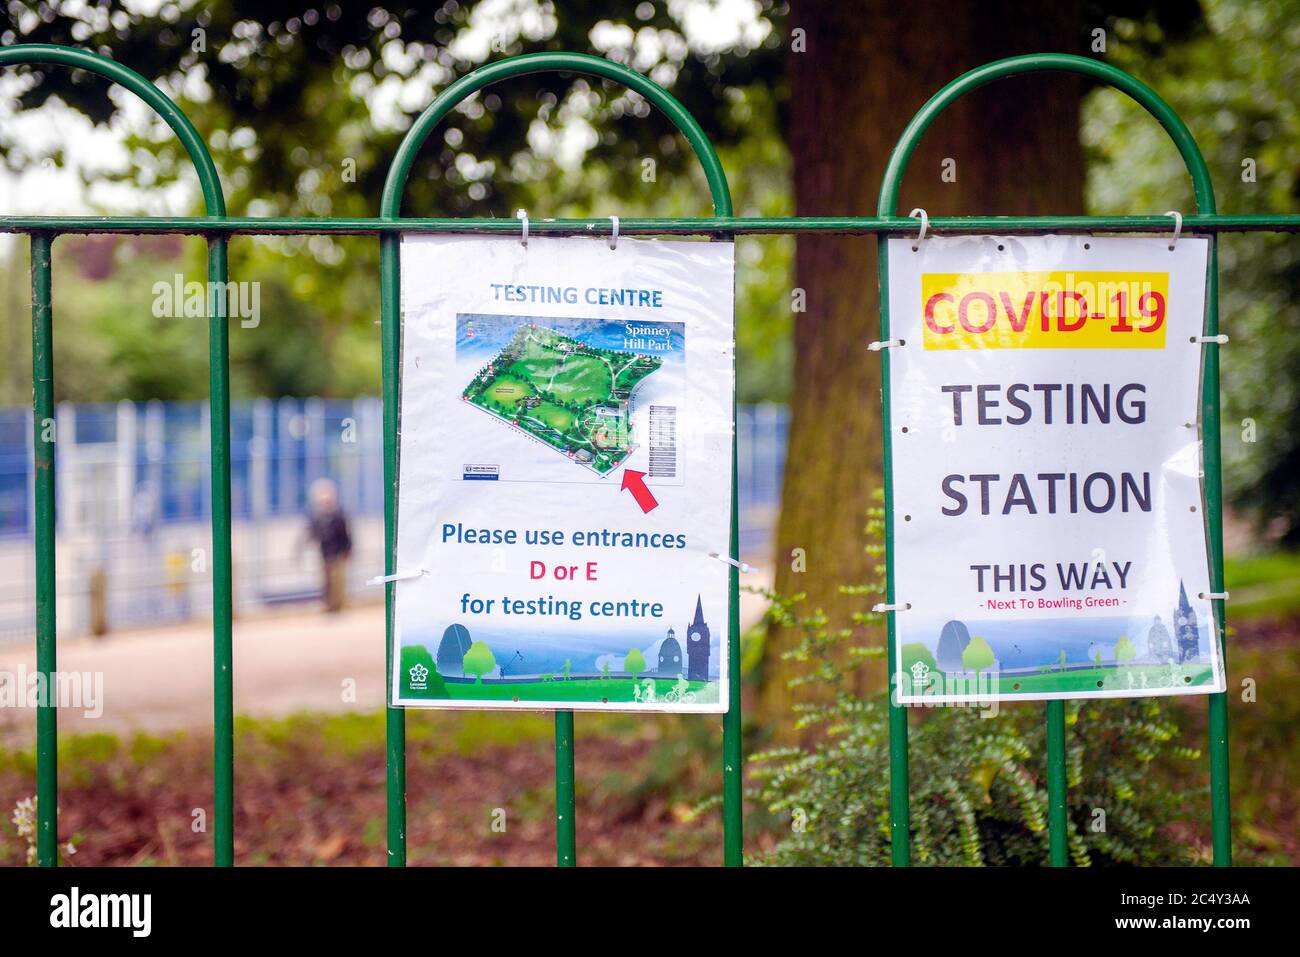 Leicester City faces lockdown extension due to surge in positive coronavirus Covid-19 cases. Pedestrian testing station at Spinney Hill Park in Evington. Stock Photo